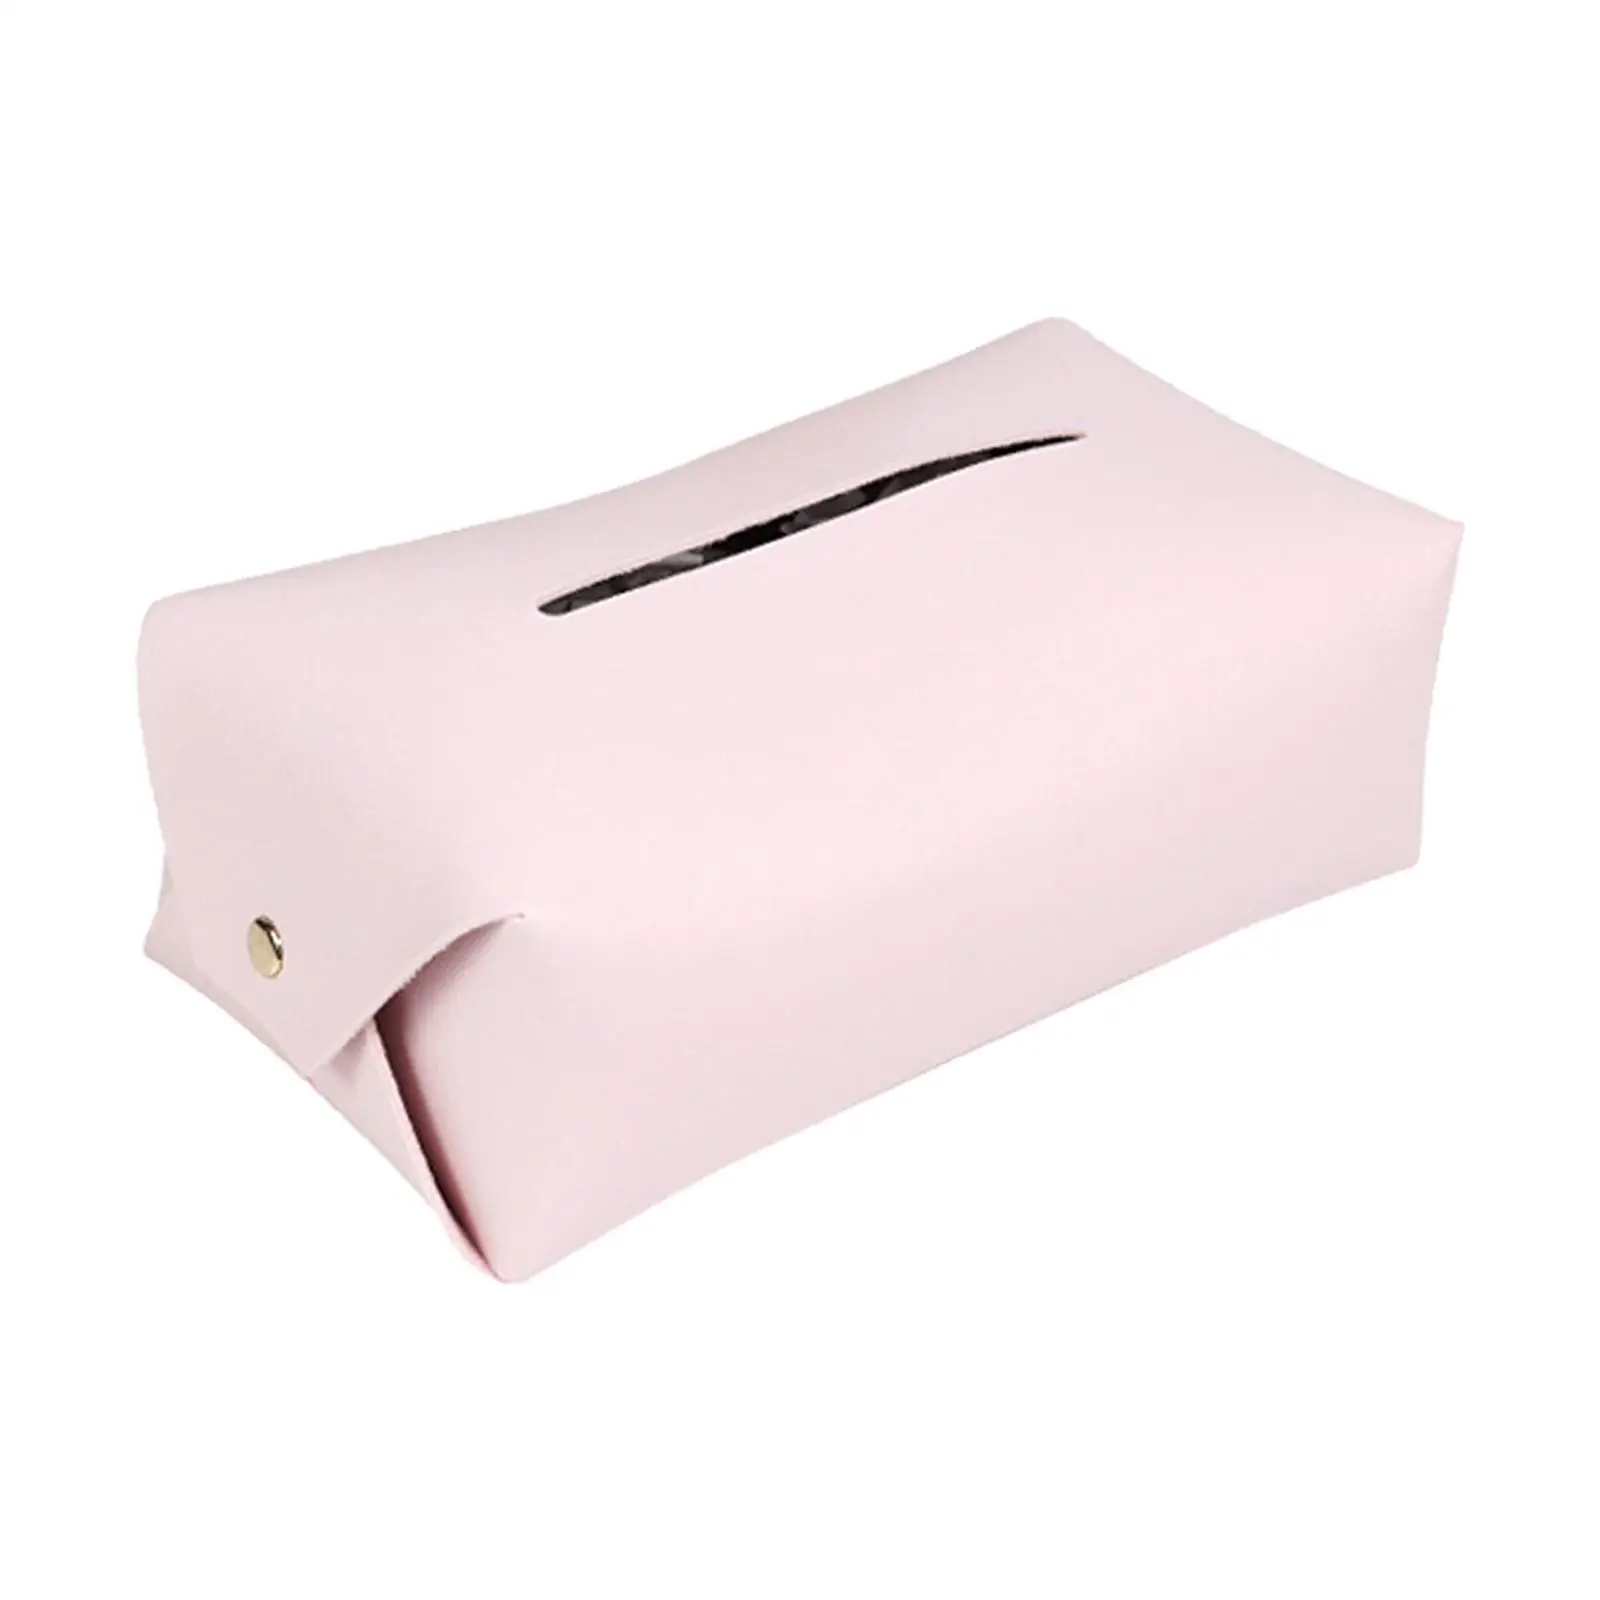 PU Leather Tissue Box Napkins Dispenser Rectangle Napkins Container Organaizer for Hotel Dressers Vanity Countertop car